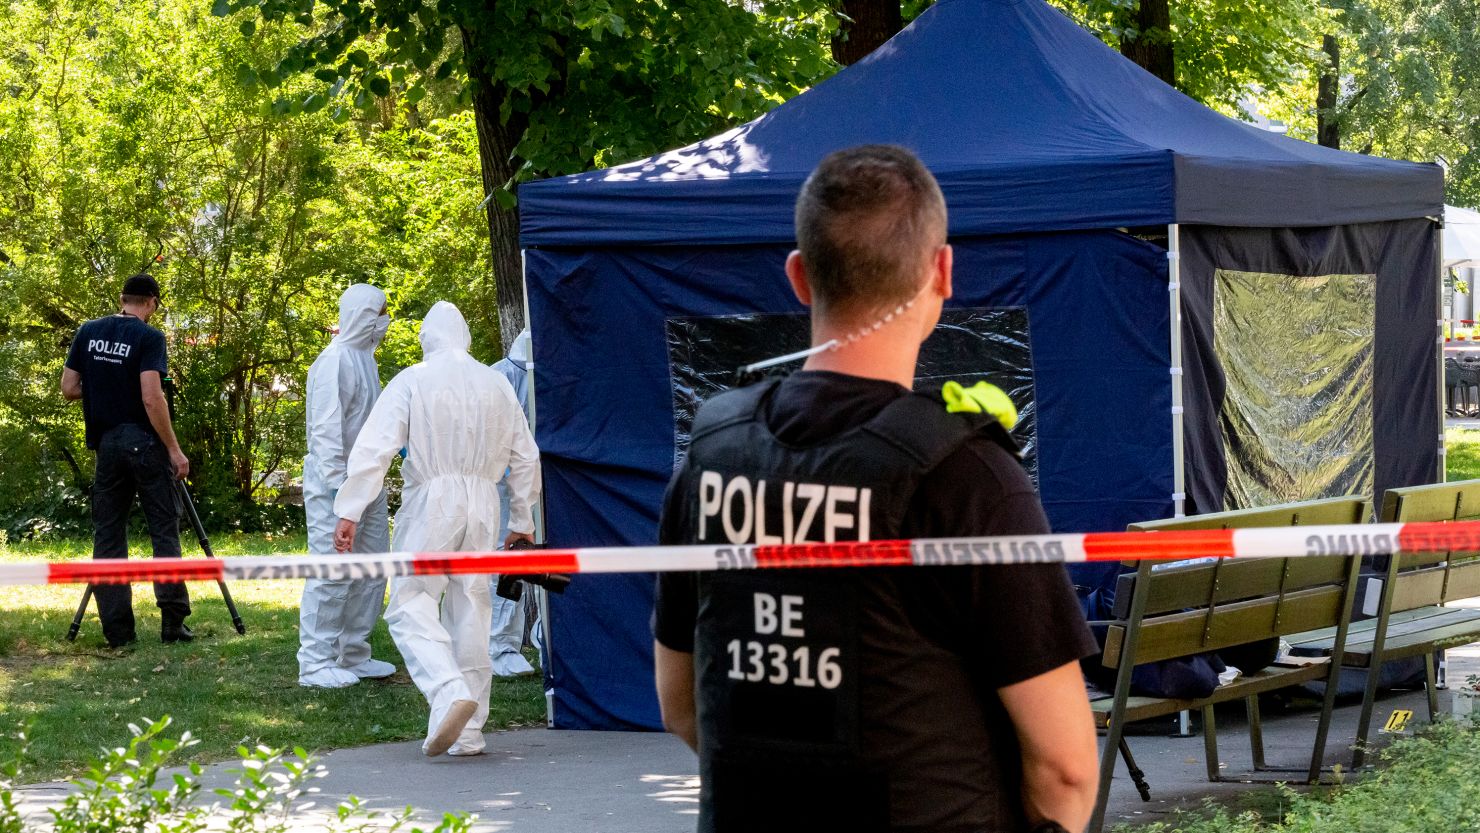 Forensic officers at the crime scene in Berlin's Tiergarten in August 2019.